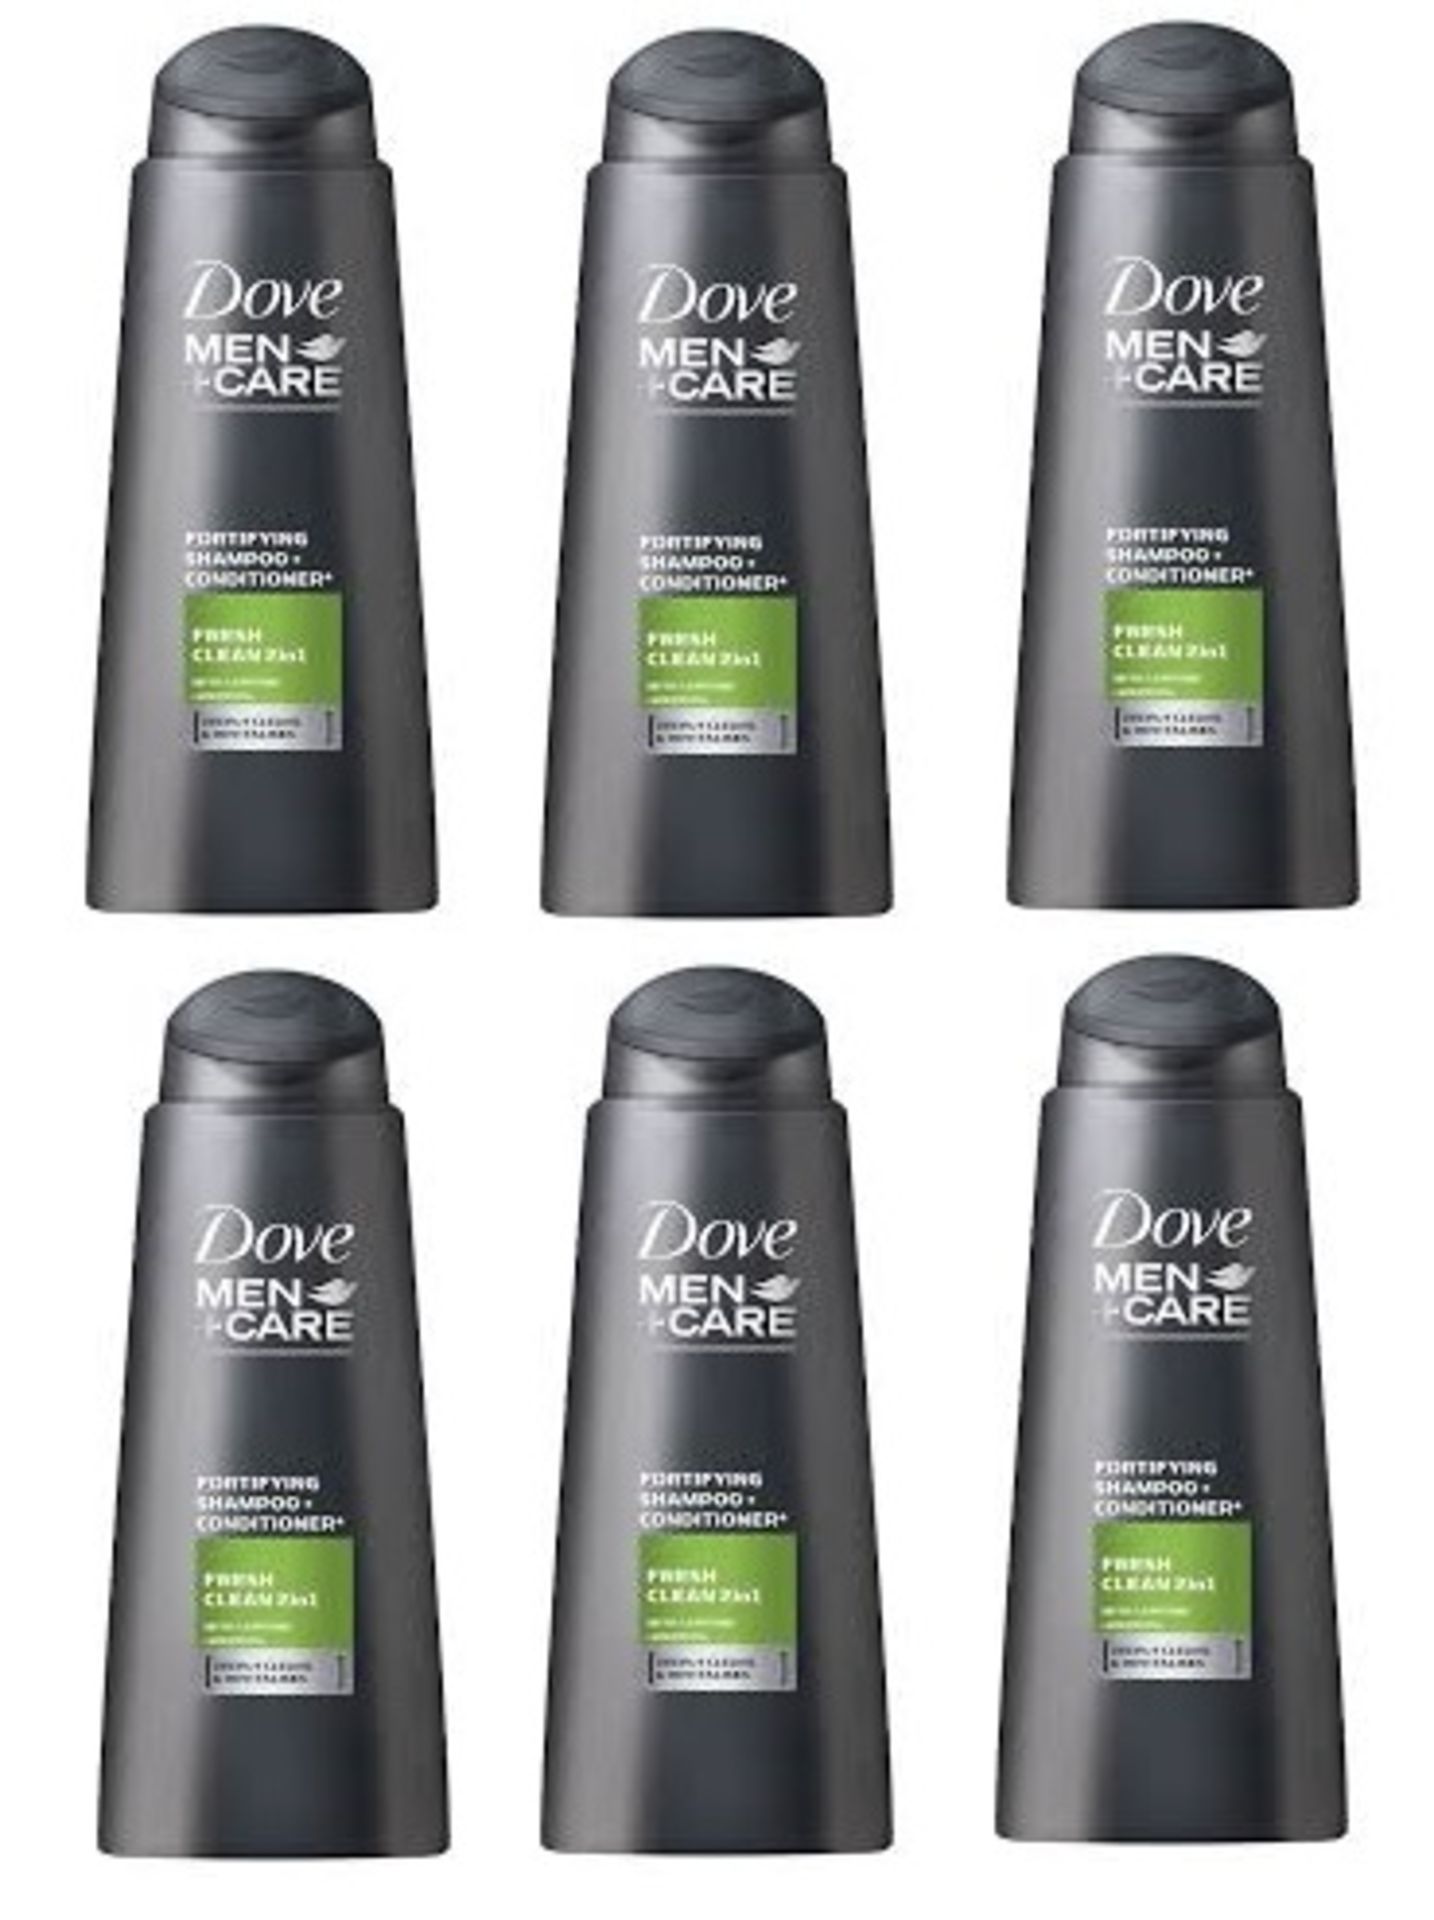 V Brand New Six Bottles 400ML Dove Men + Care Fortifying Shampoo And Conditioner - Fresh Clean 2